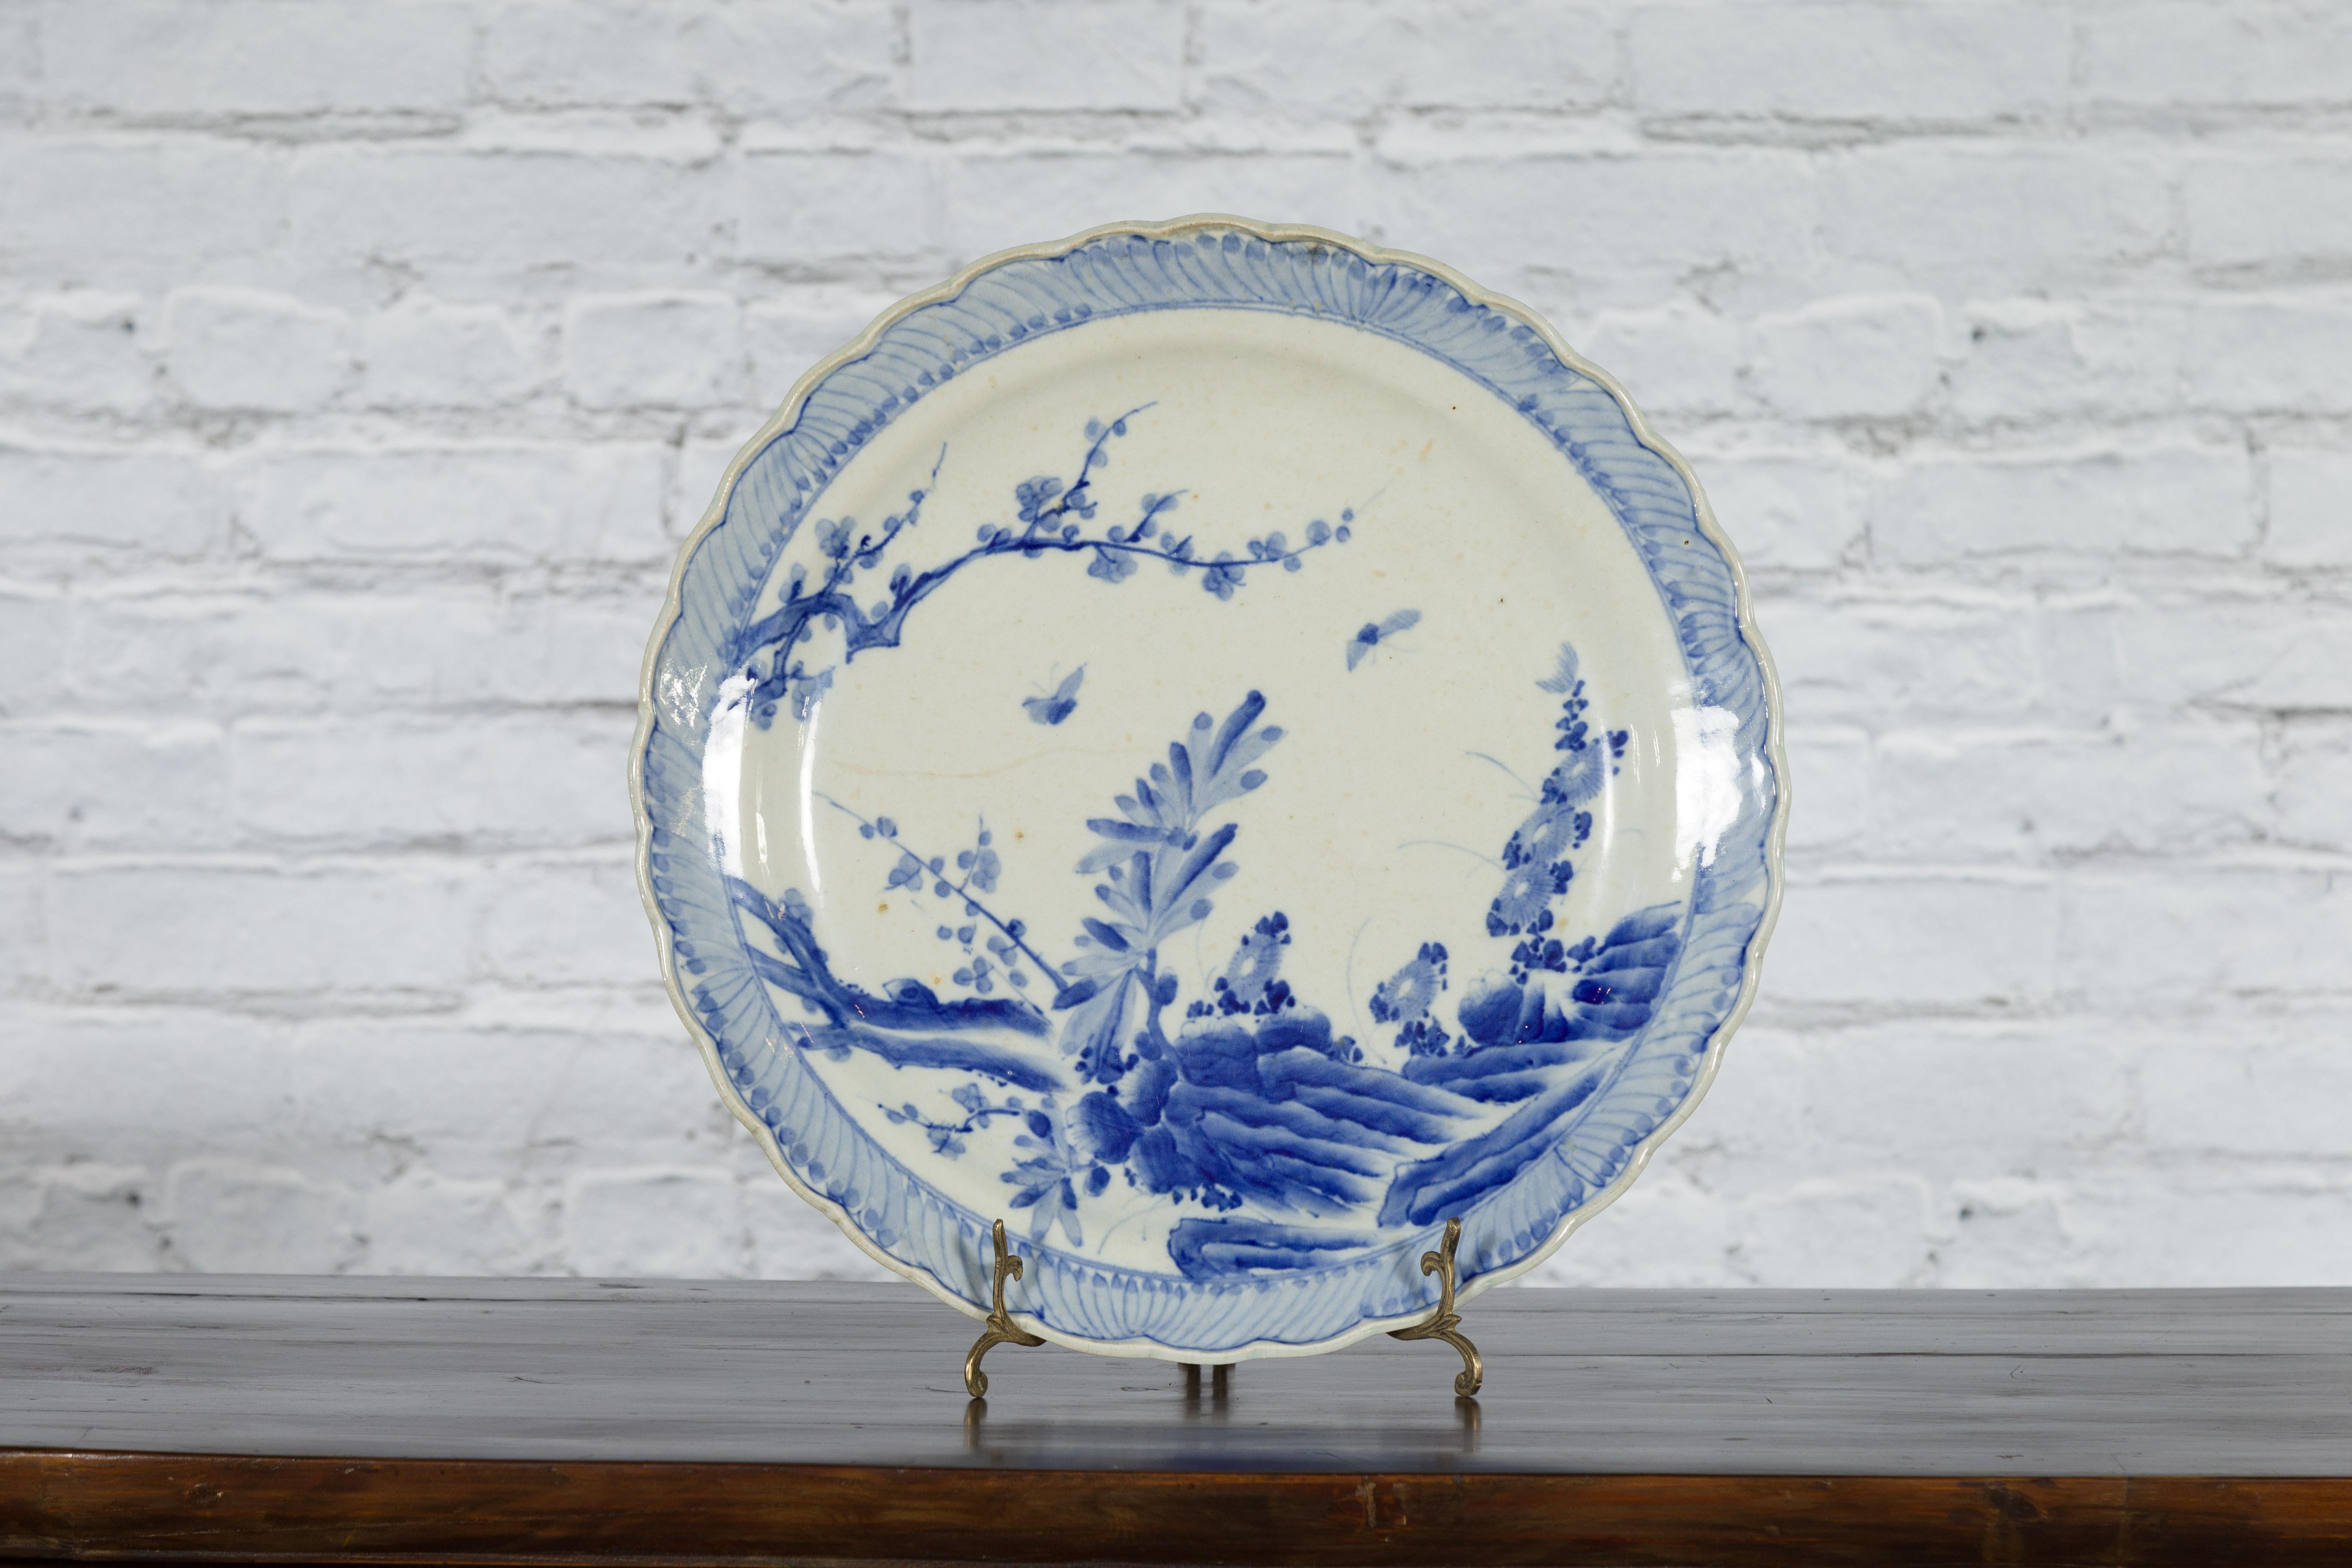 Japanese Blue and White Hand-Painted Porcelain Charger Plate with Foliage Décor For Sale 14